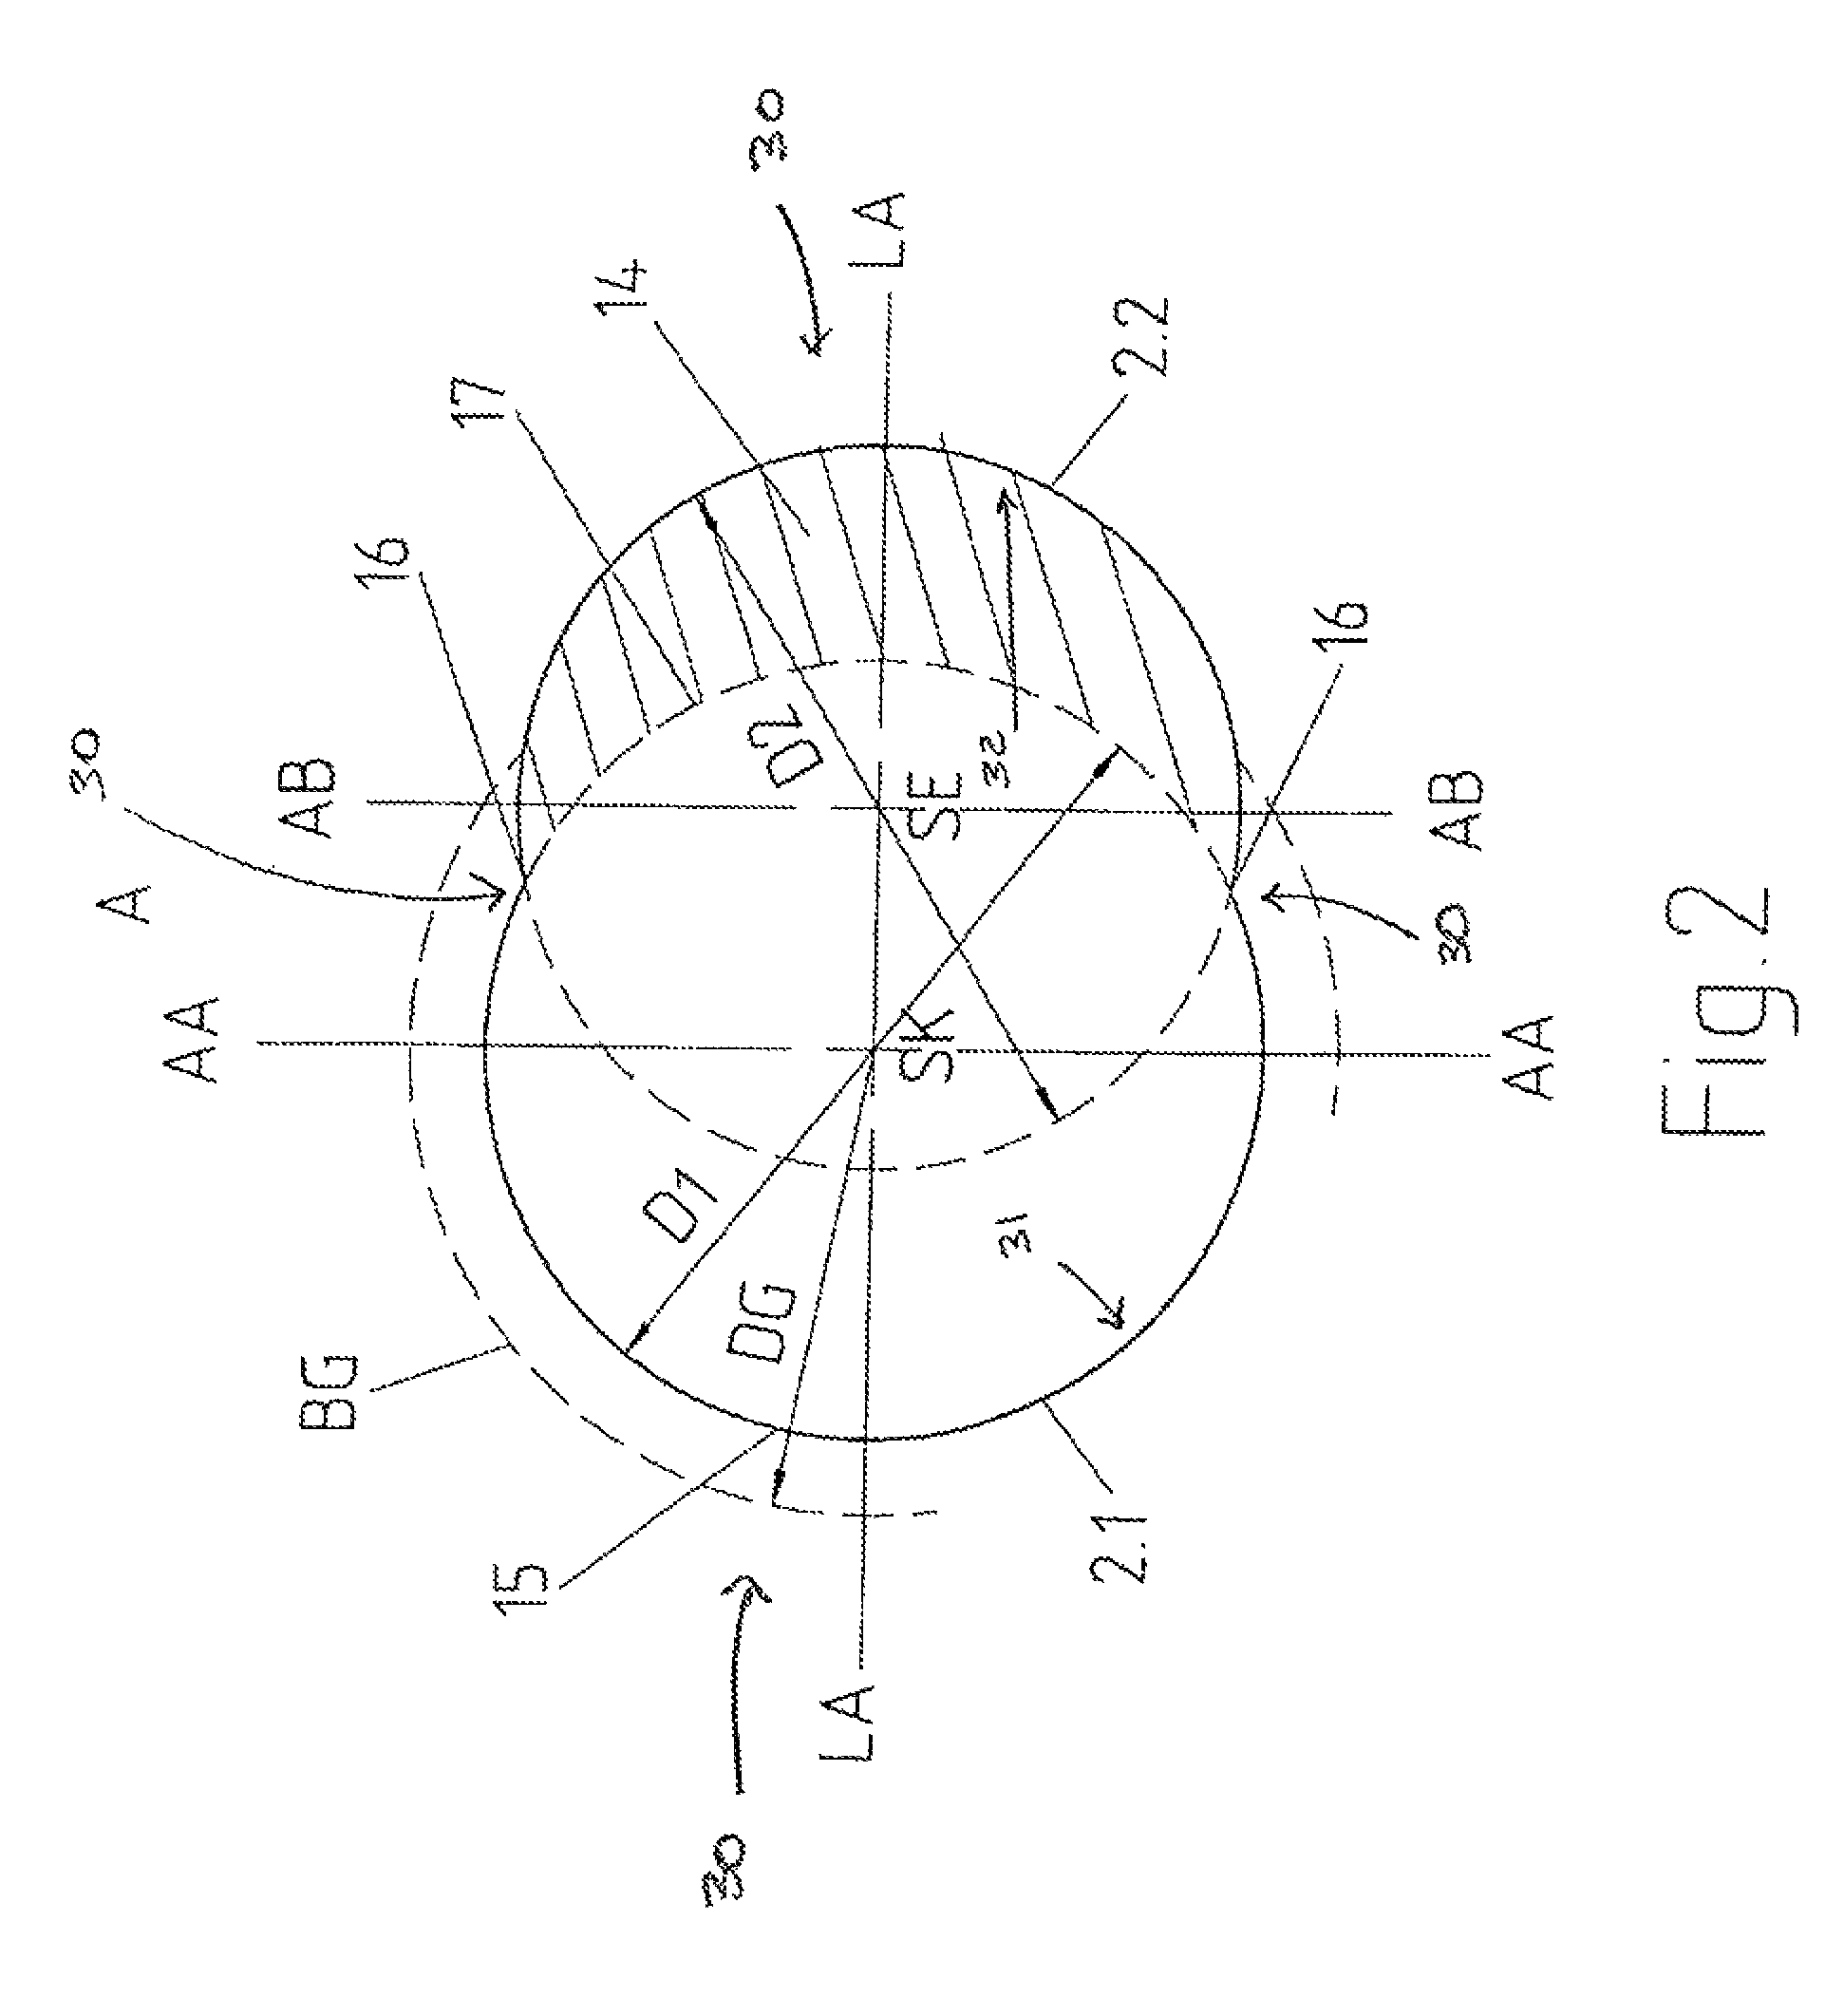 Apparatus for the constant-angle fixation and compression of a fracture or osteotomy of a bone